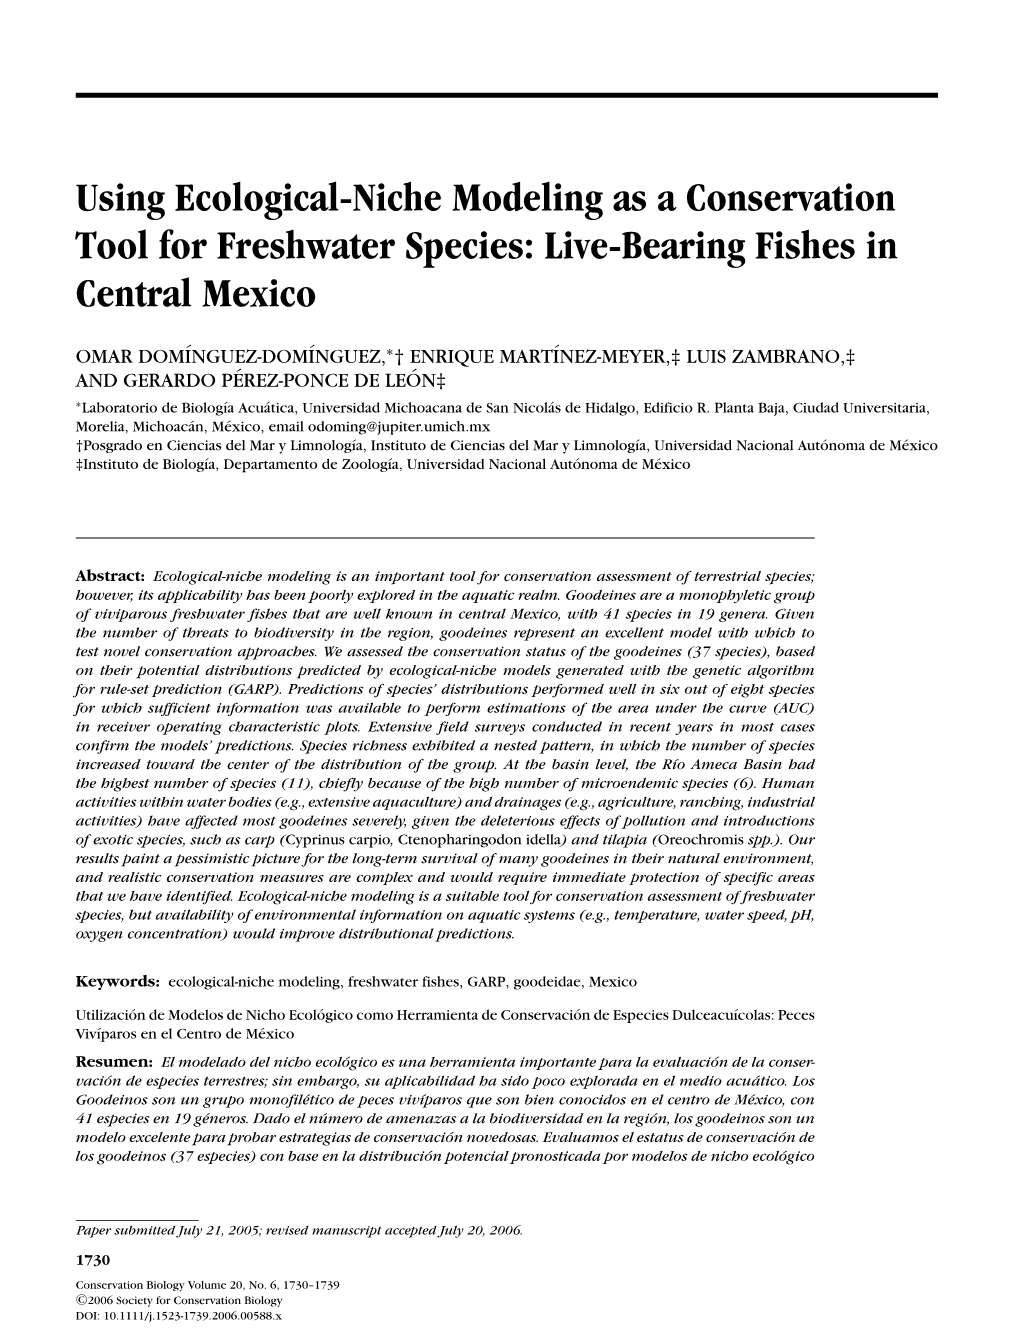 Using Ecological-Niche Modeling As a Conservation Tool for Freshwater Species: Live-Bearing Fishes in Central Mexico